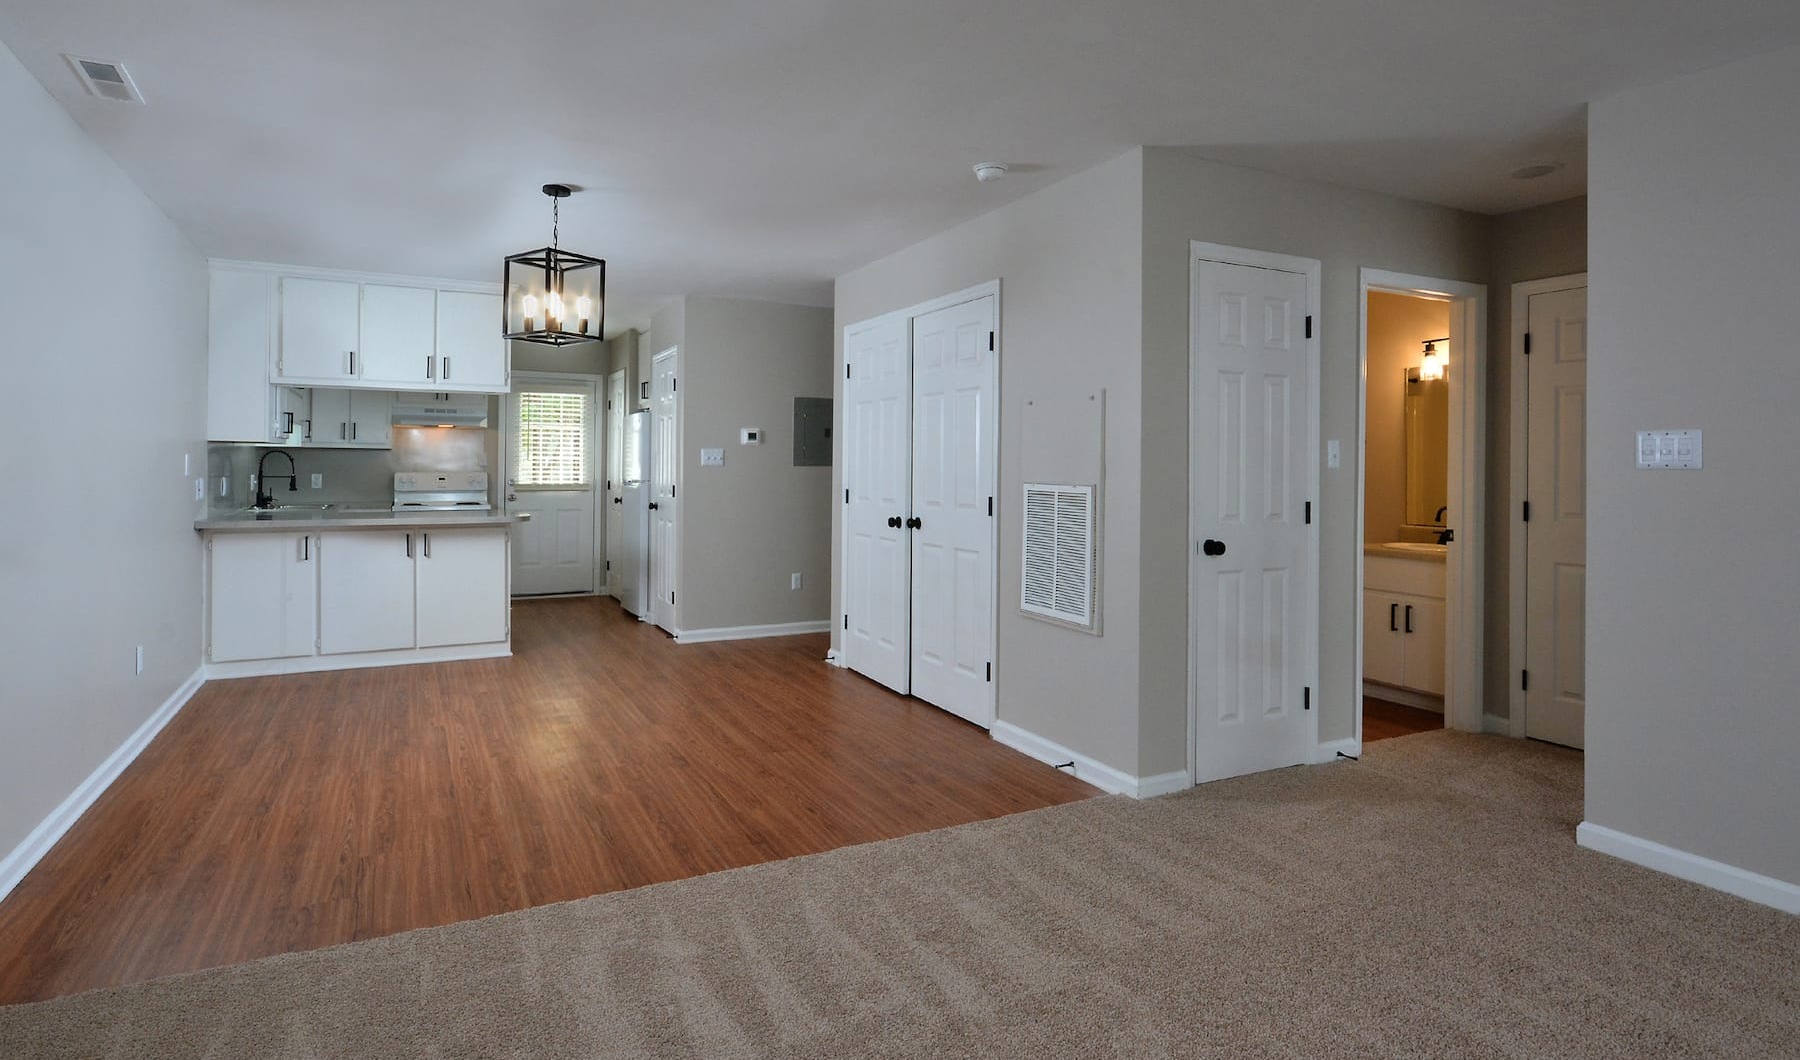 spacious living room that leads into the kitchen and opens up to other rooms through a large hallway